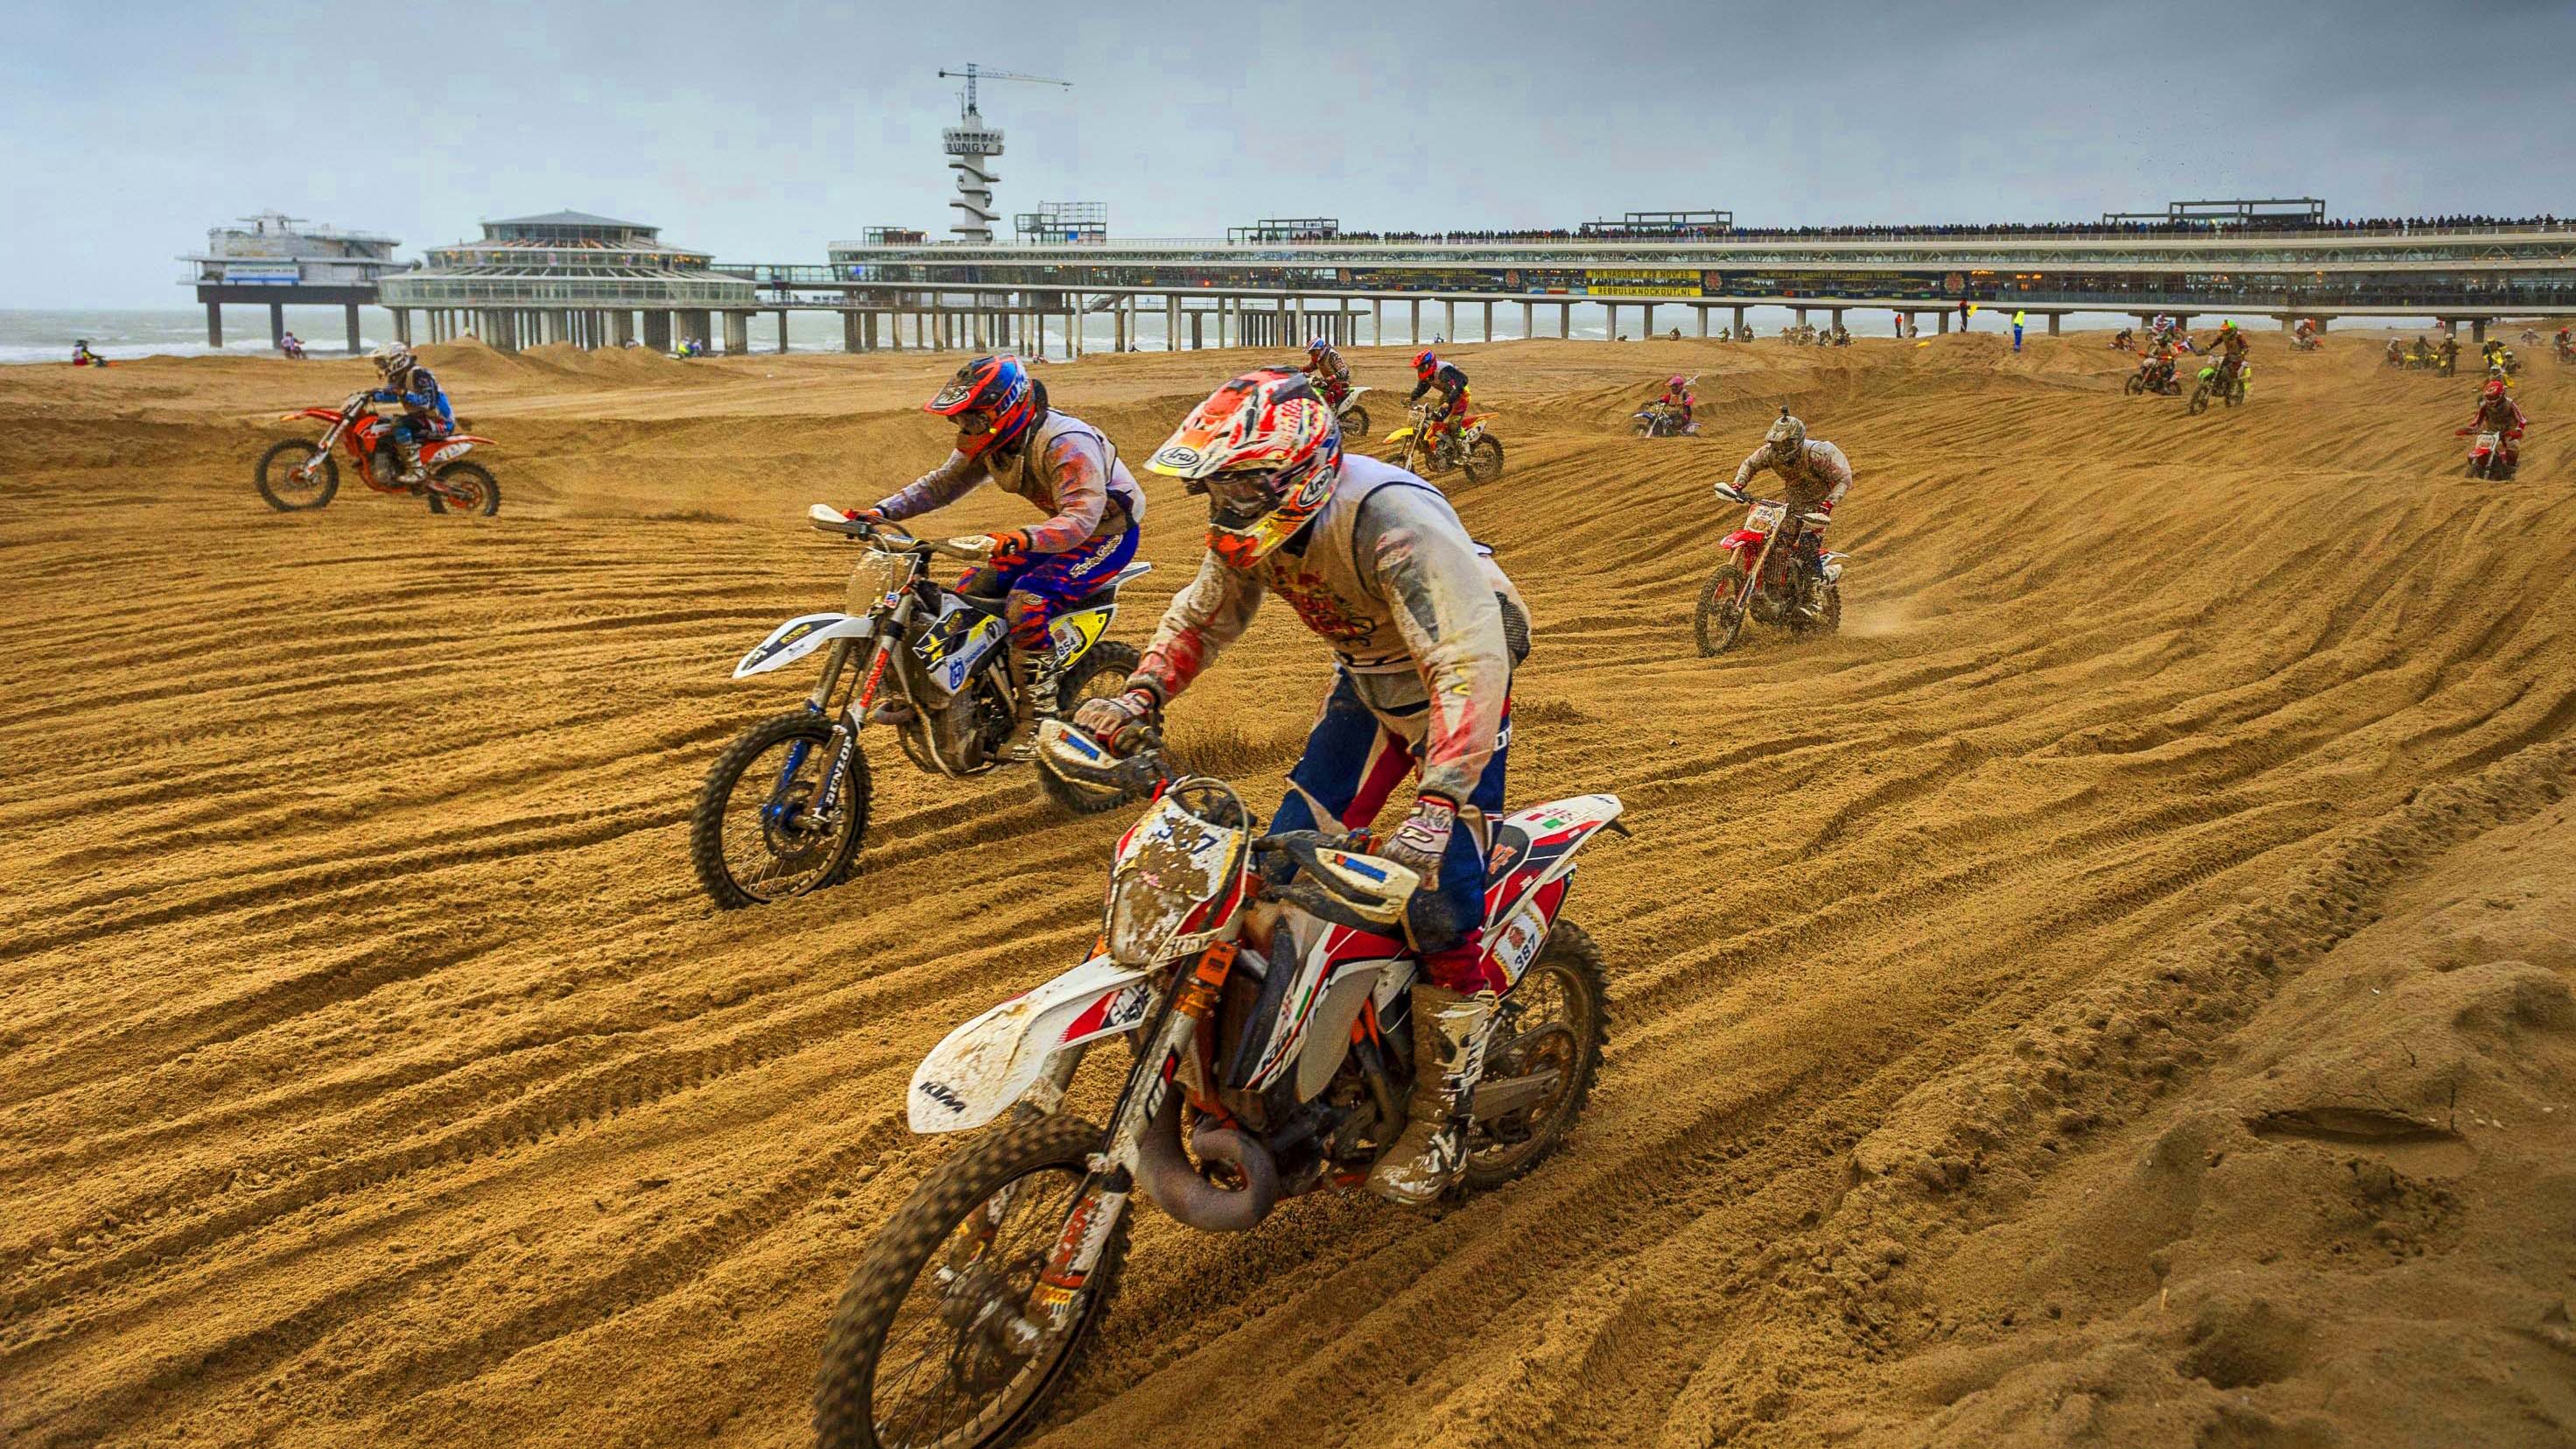 Mass Dirt Bike Racing on Hague Beach Red Bull Knock Out - YouTube. 